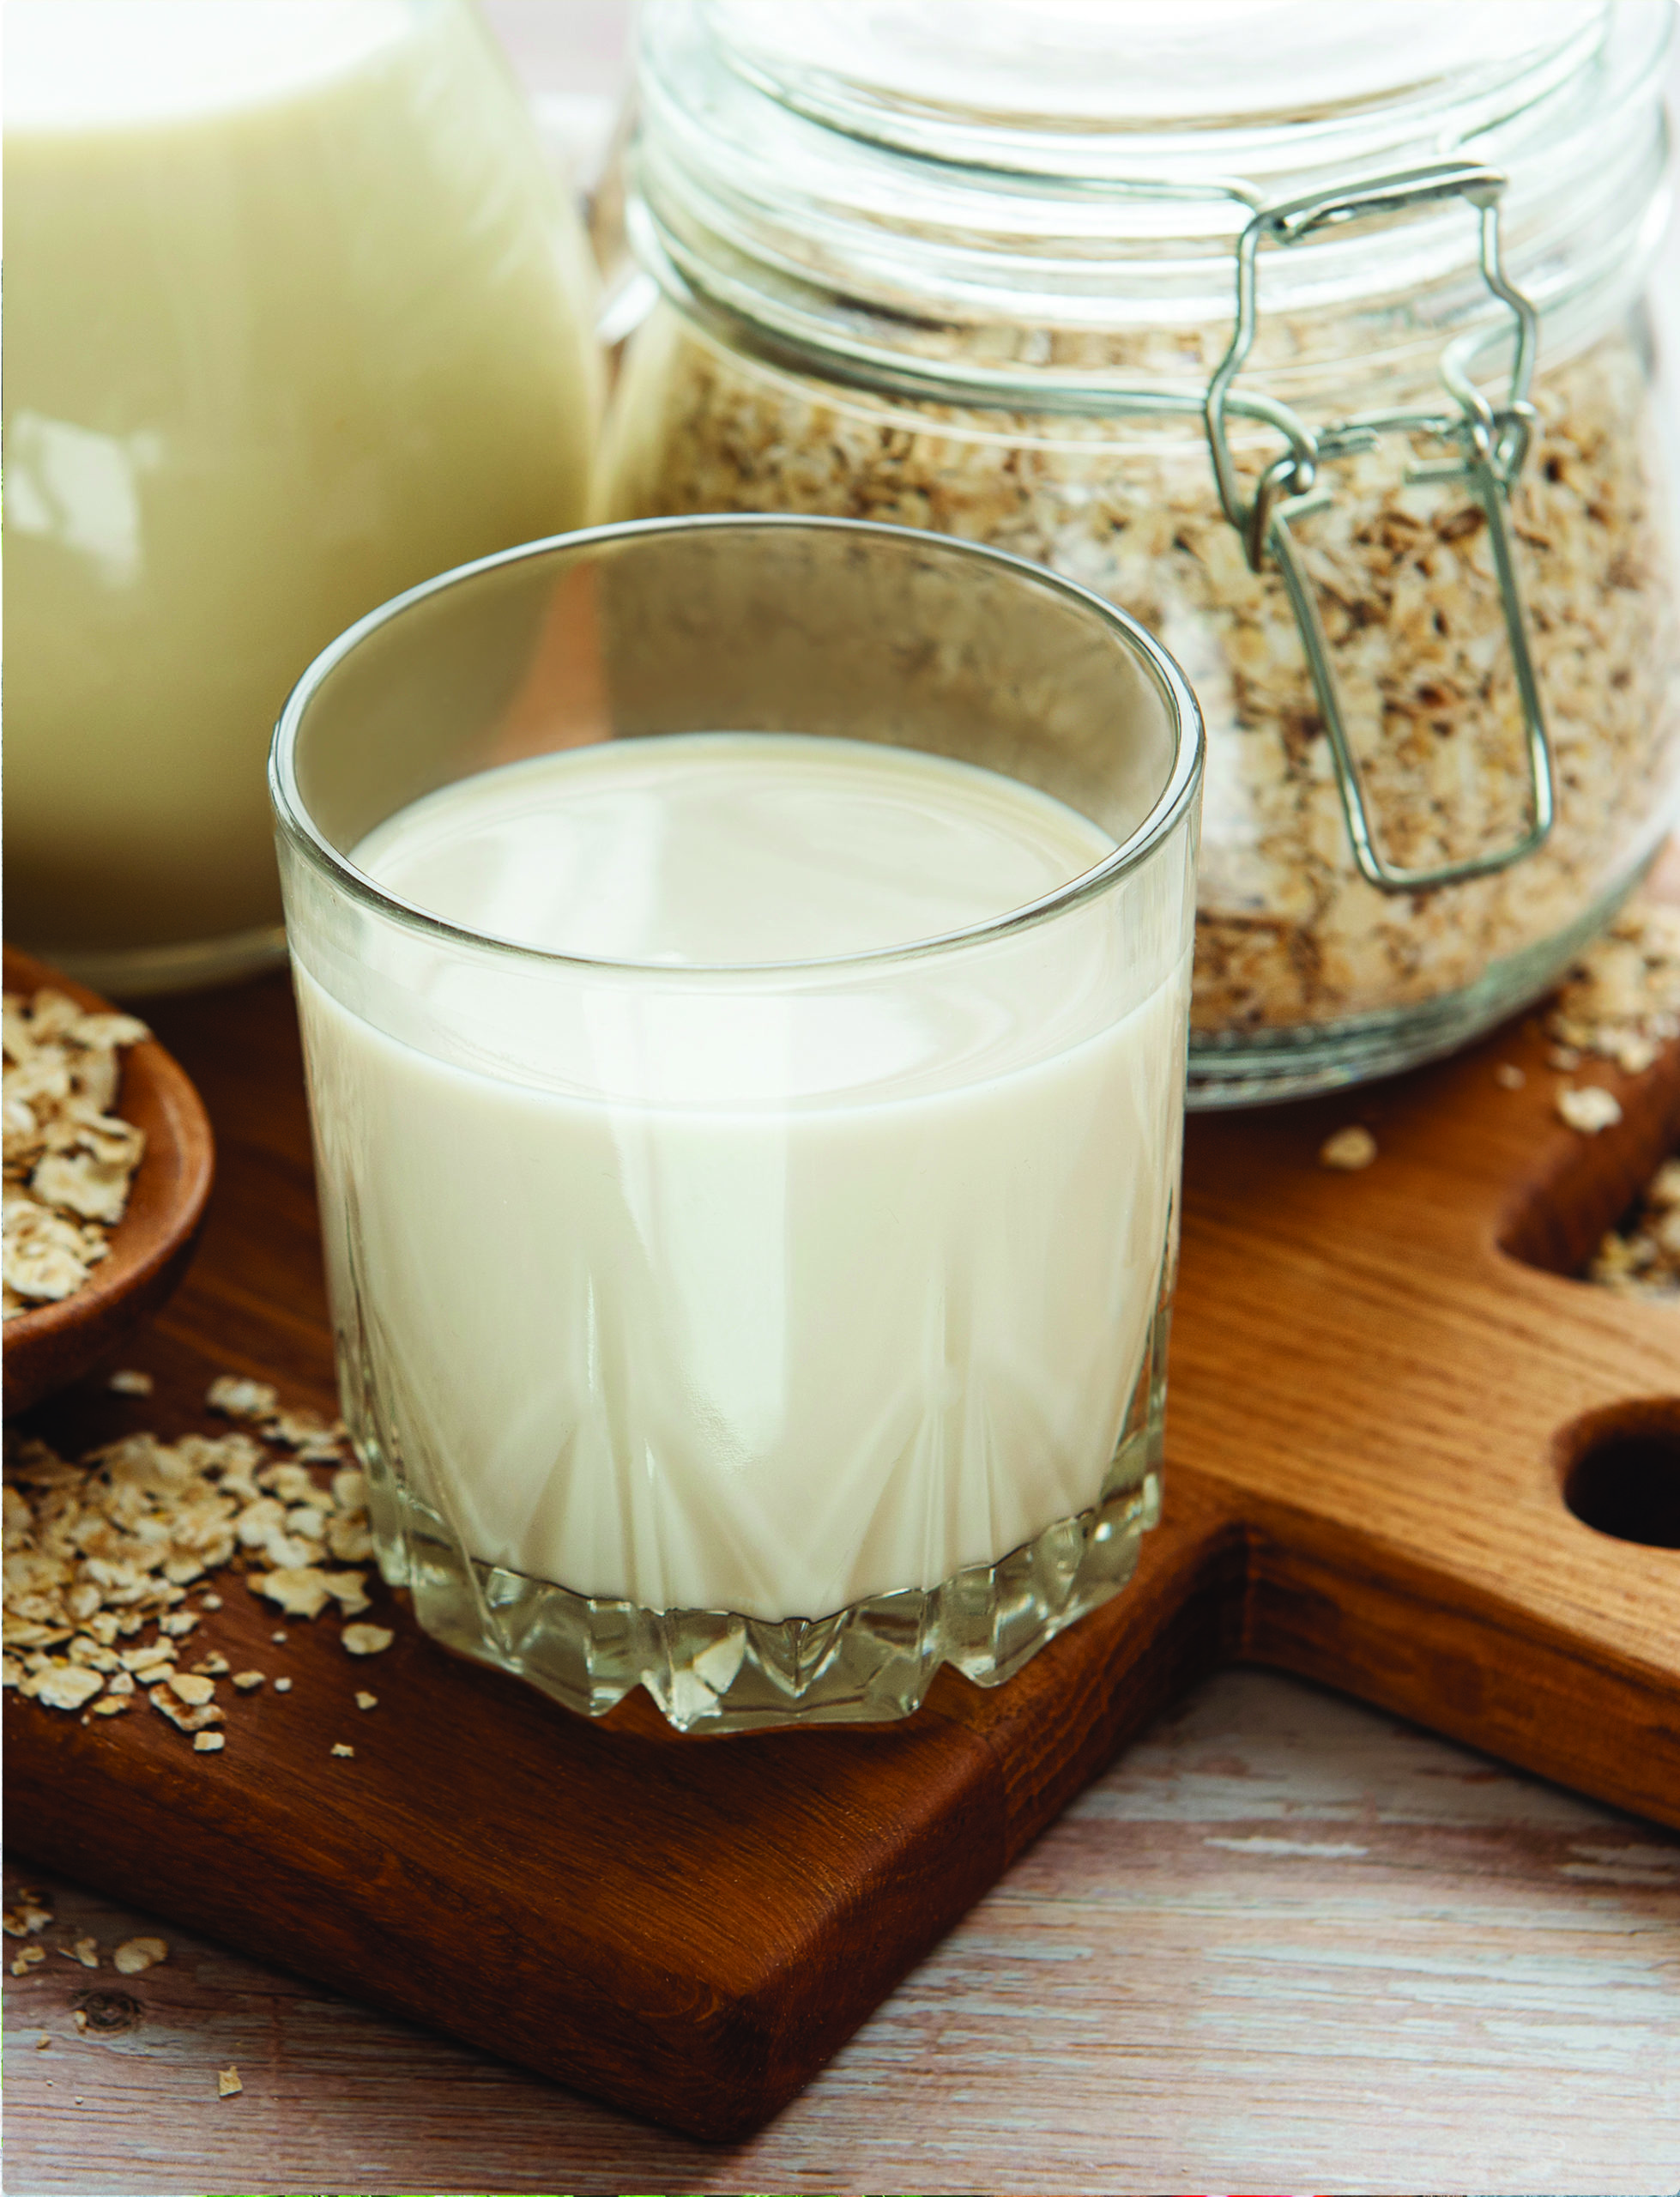 milk and dairy are common food intolerances that affect nutrition